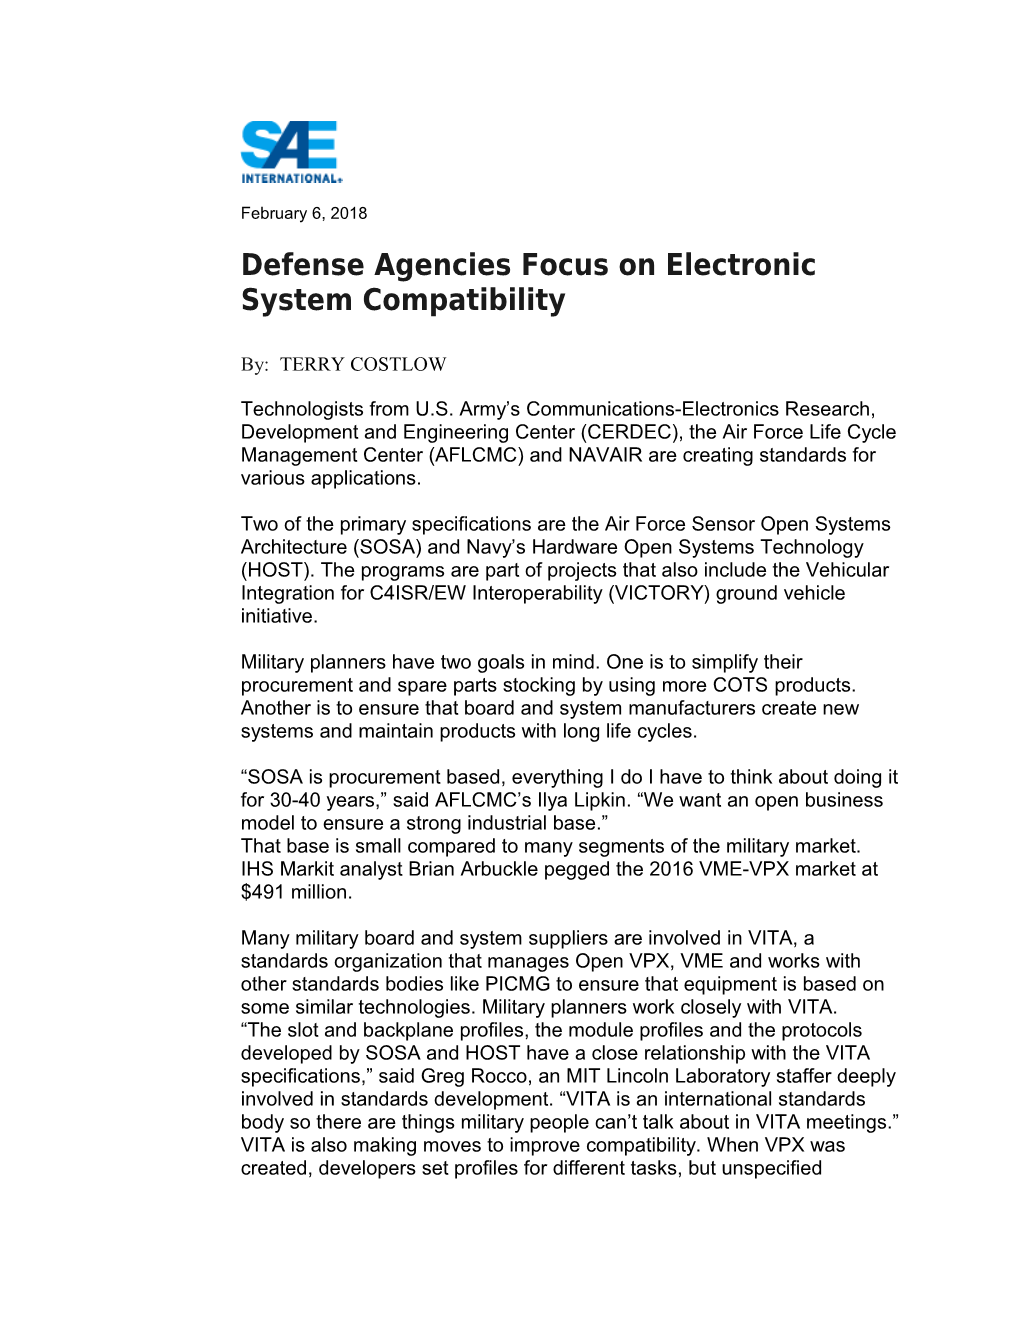 Defense Agencies Focus on Electronic System Compatibility